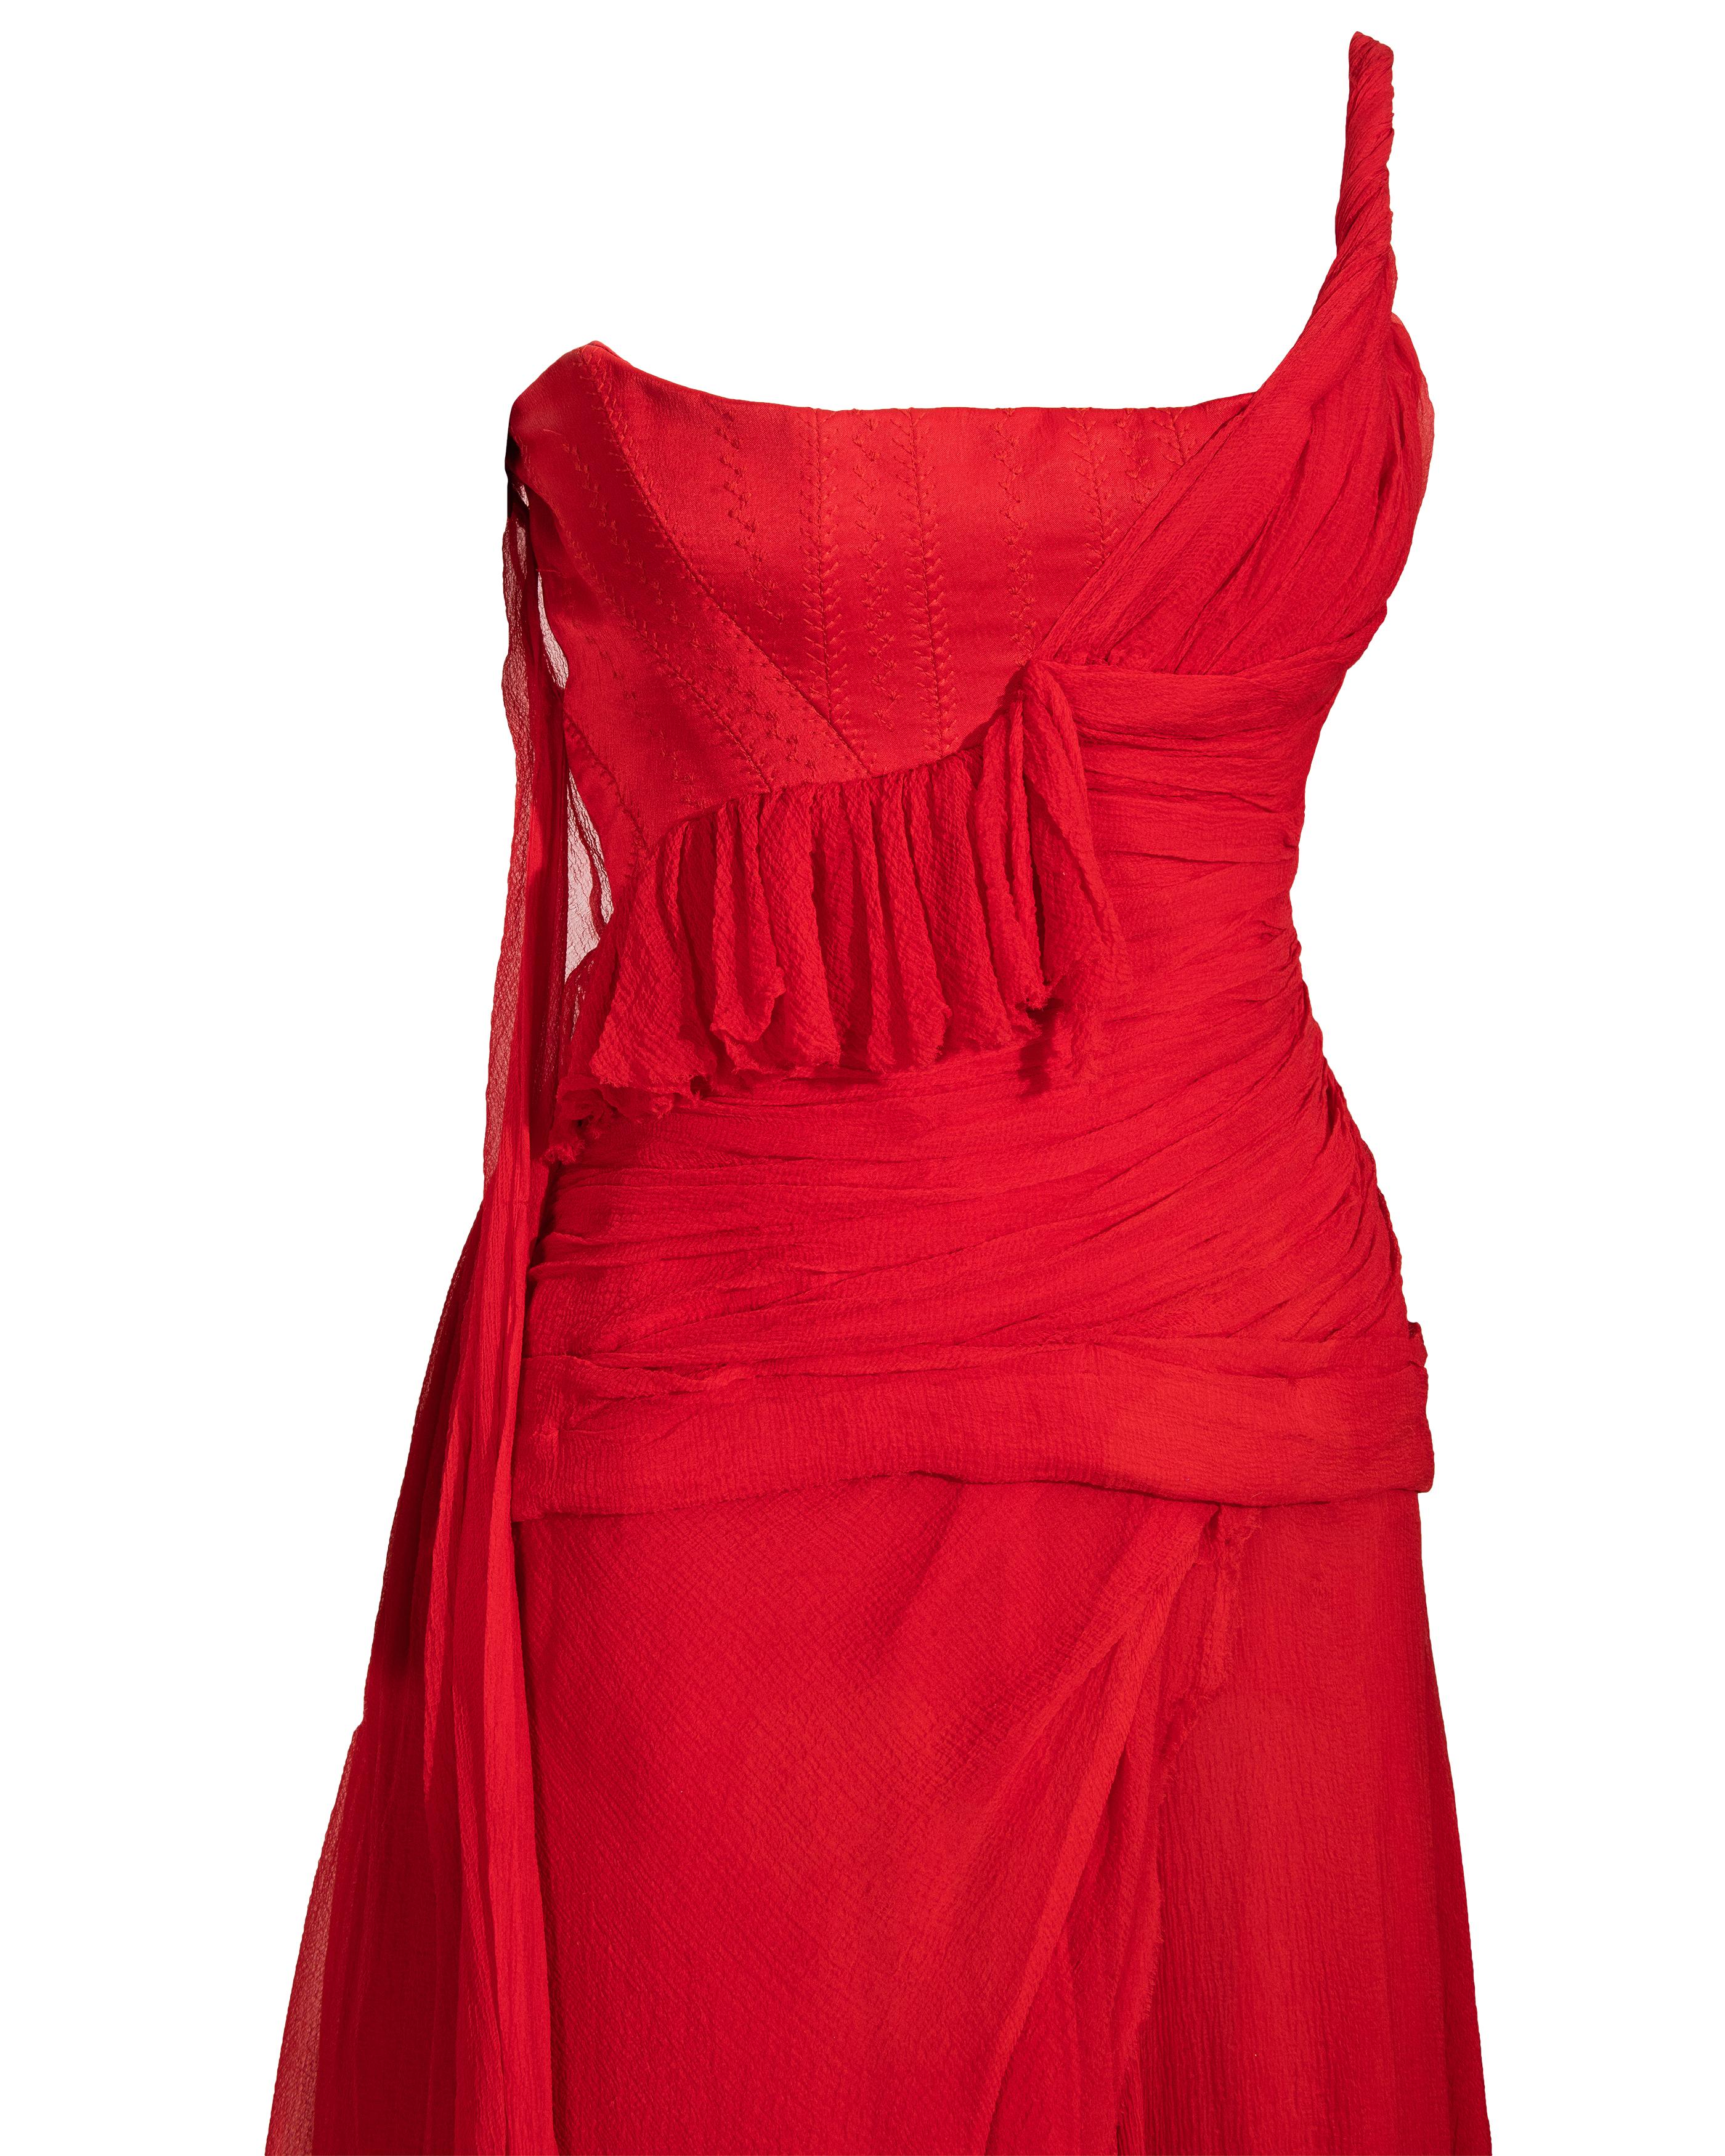 S/S 2003 Alexander McQueen  'Irere' Collection Red Silk Chiffon Gown with Sash For Sale 7